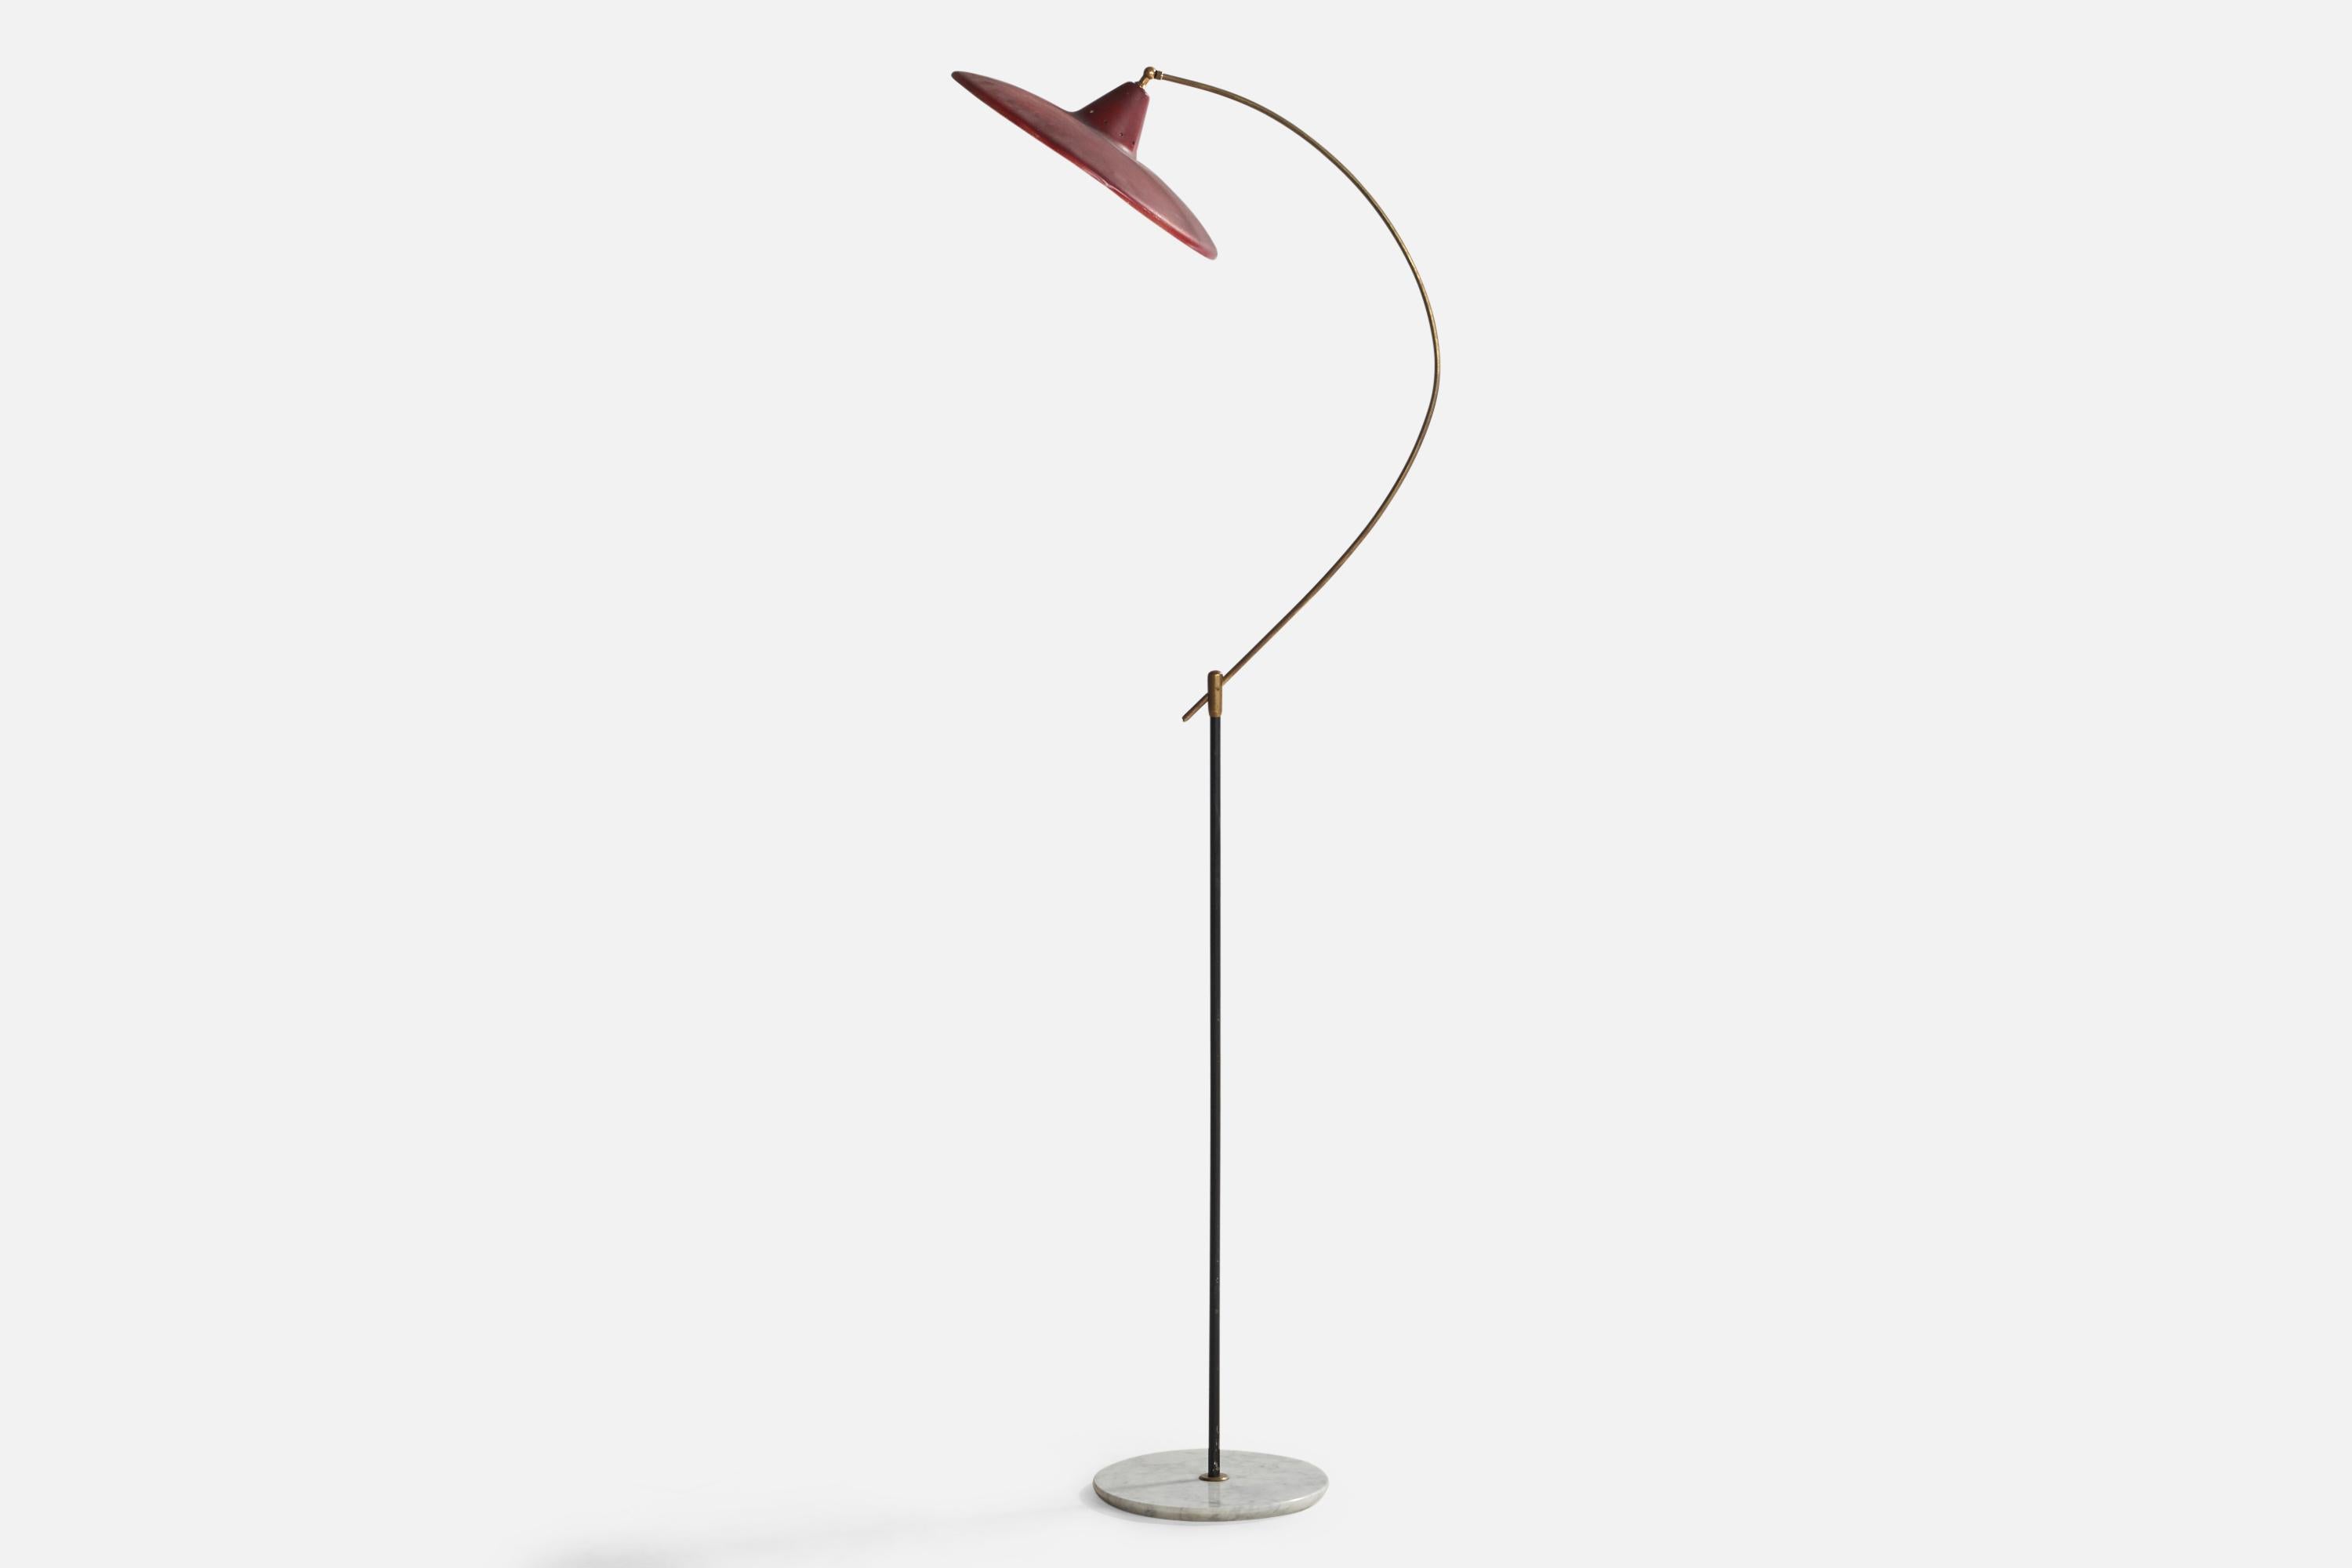 A tall adjustable brass, red and black-lacquered metal and Carrara marble floor lamp designed and produced by Stilux Milano, Italy, 1950s.

Overall Dimensions (inches): 77.75” H x 16.75” W x 25” D

Bulb Specifications: E-26 Bulb

Number of Sockets: